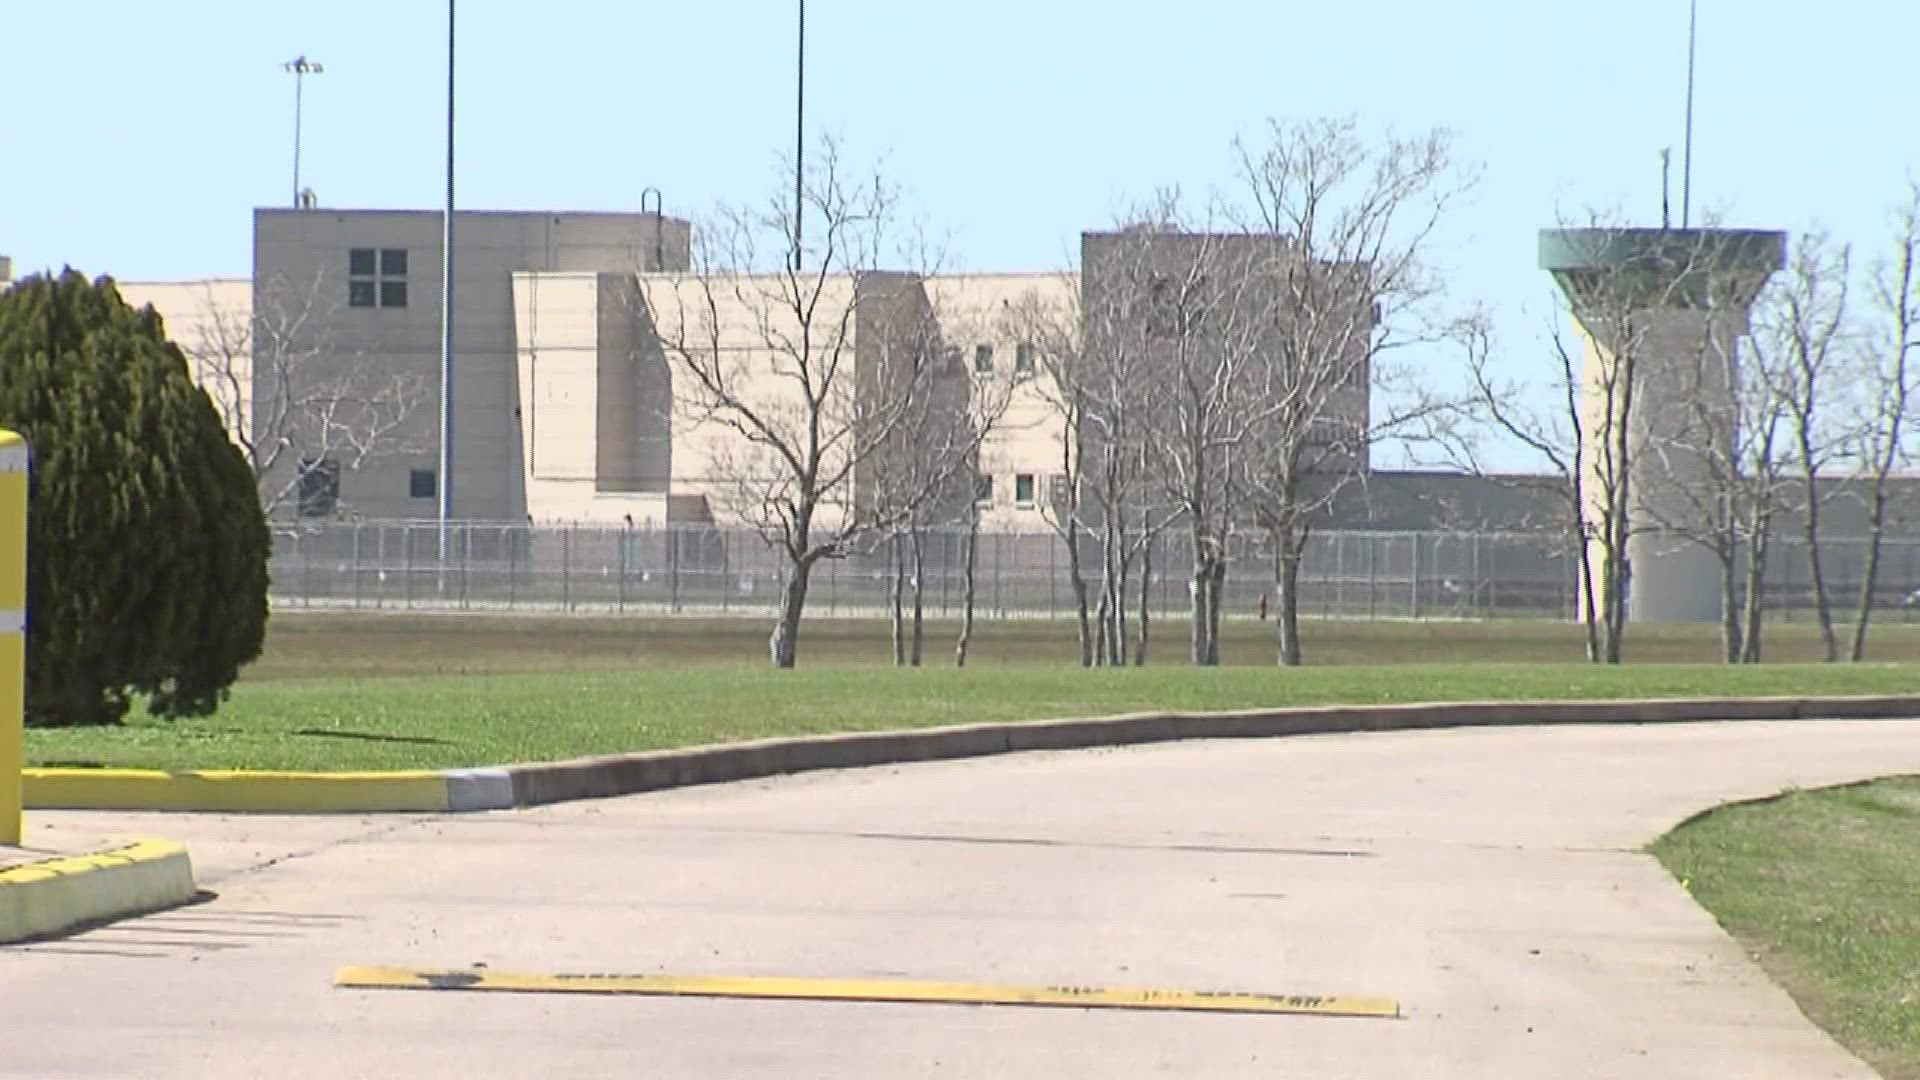 One of two inmates involved in the fight was taken to a Southeast Texas hospital for treatment.